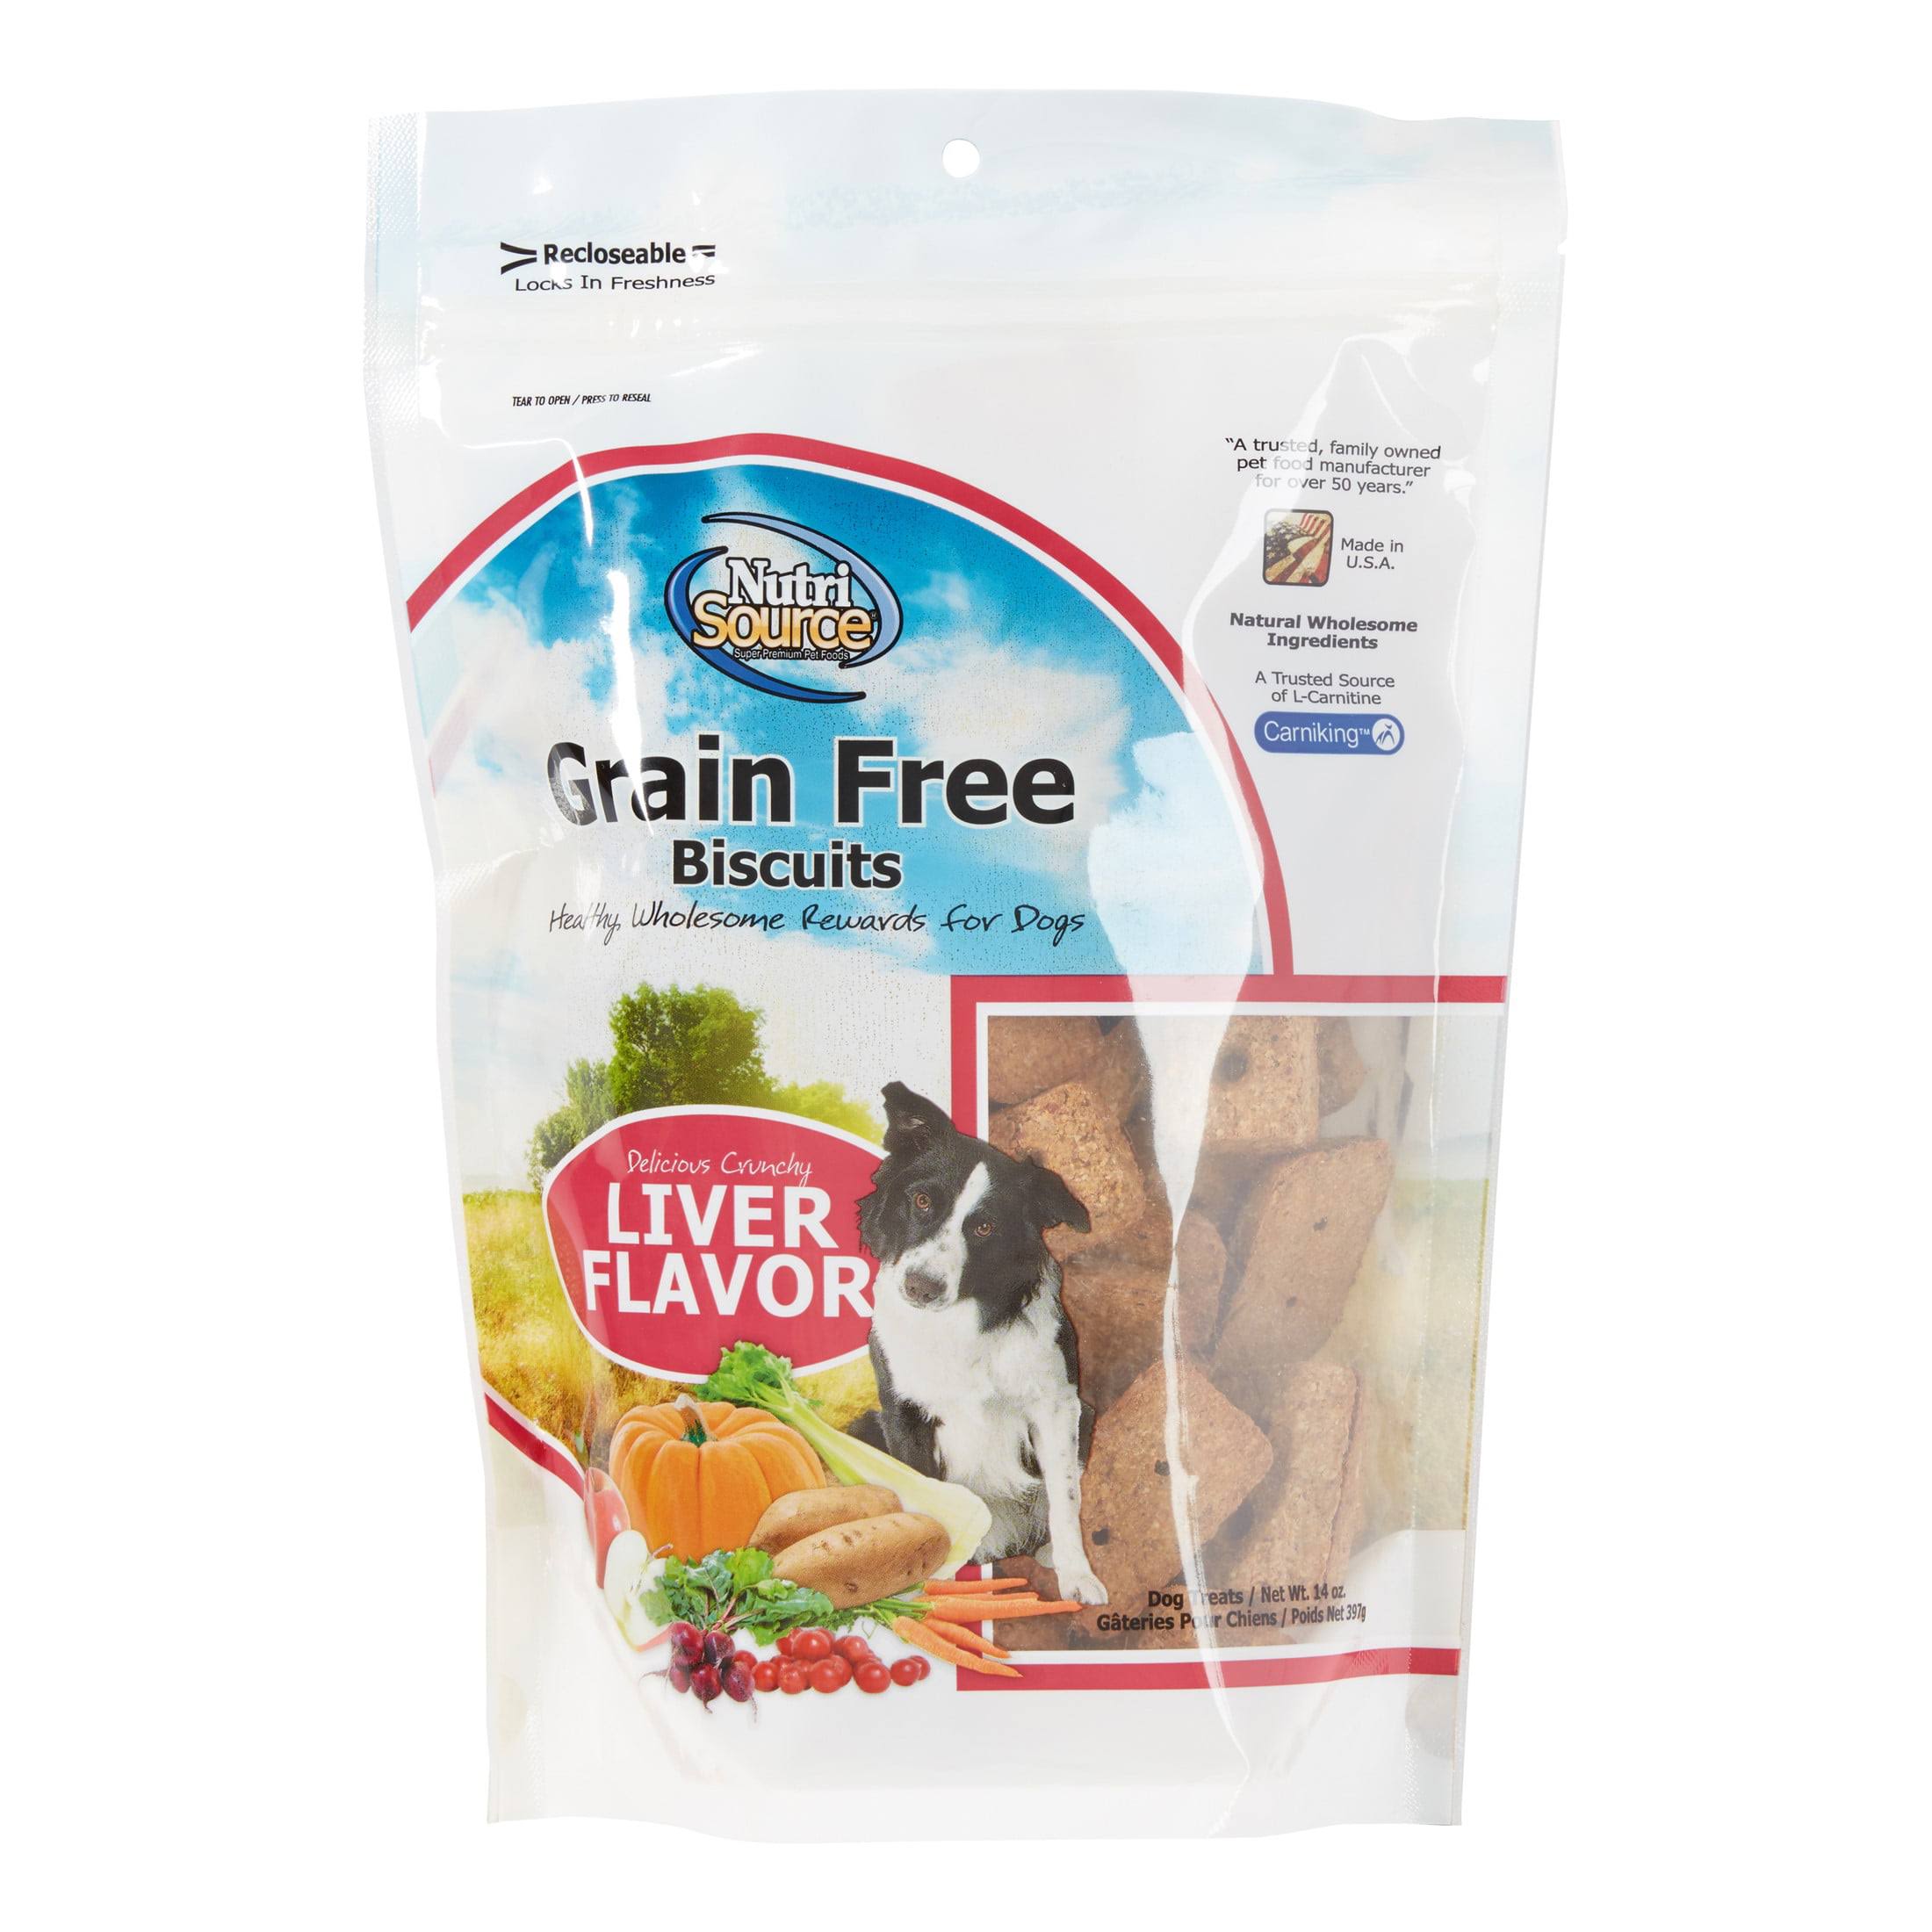 Nutrisource Grain Free Biscuits - Liver